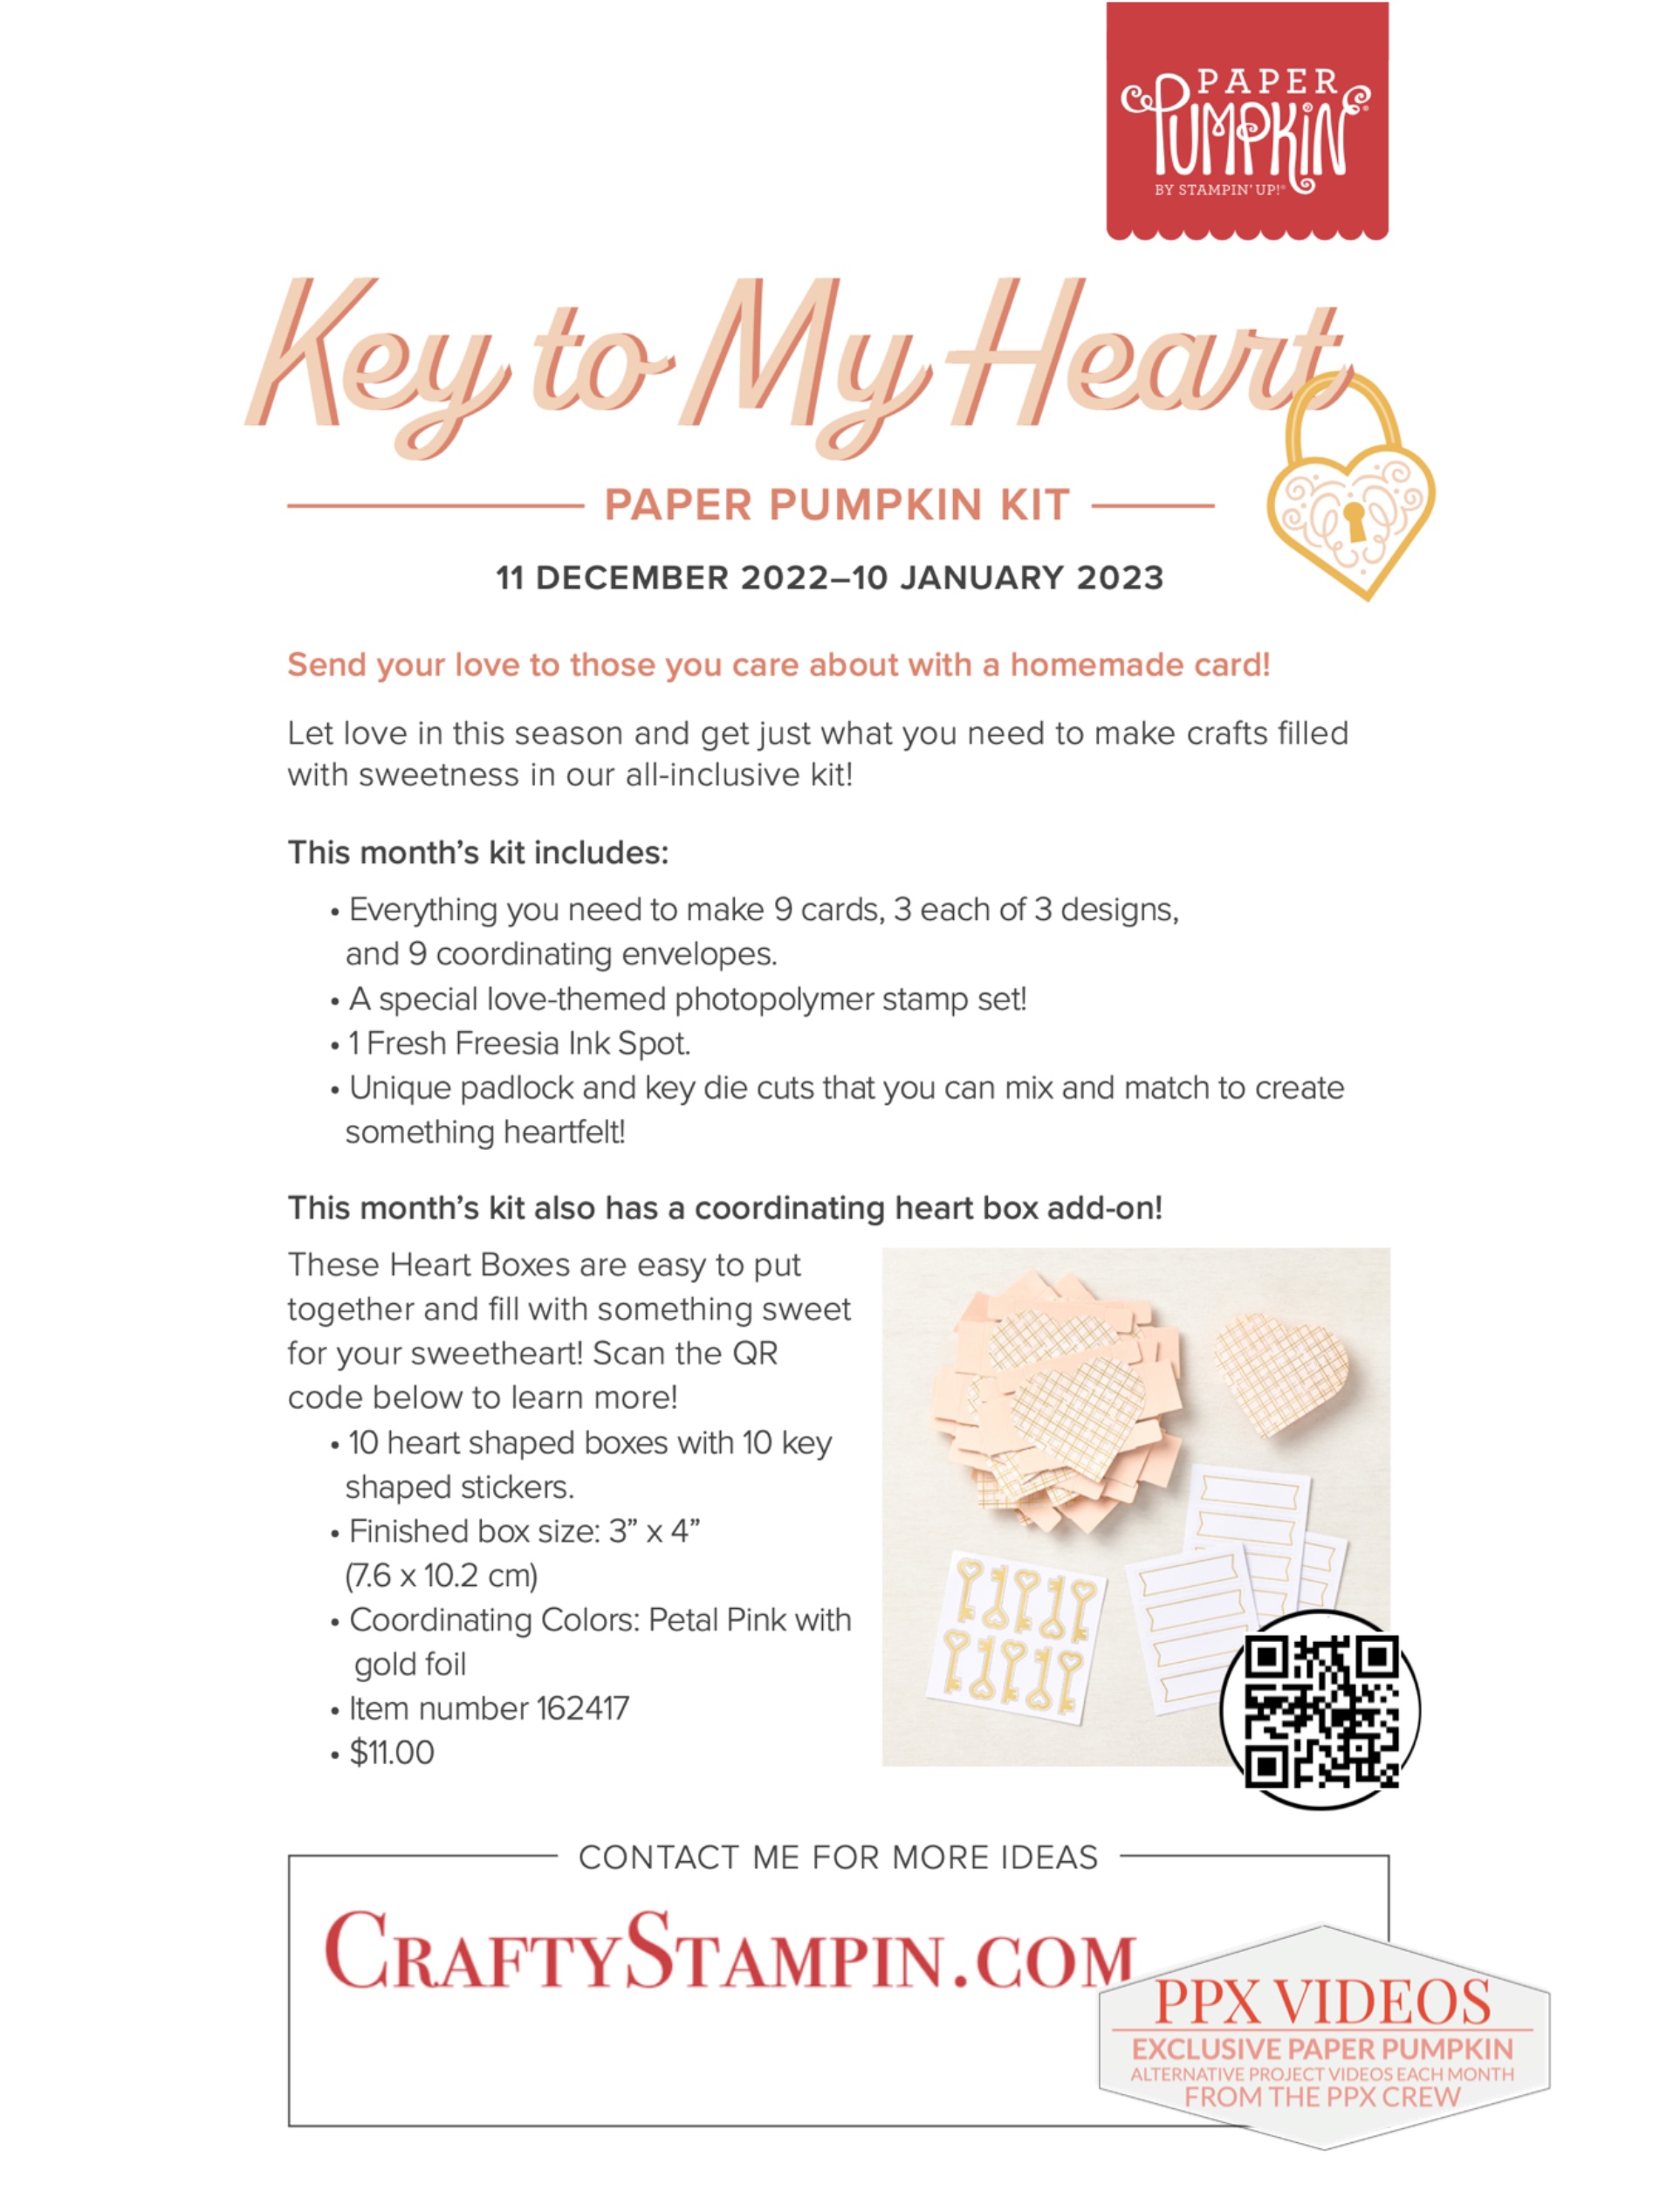 January 2023 Paper Pumpkin Kit | Join Stampin’ Up! | Frequently Asked Questions about becoming a Stampin’ Up! Demonstrator | Join the Craft Stampin’ Crew | Stampin Up Demonstrator Linda Cullen | Crafty Stampin’ | Purchase Stampin’ Up! Product | FAQ about Paper Pumpkin | Heart Boxes [162417] - Price: $11.00 | Prepaid Paper Pumpkin Subscription 1-Month [137858] | Prepaid Paper Pumpkin Subscription 3-Month [137859] | Prepaid Paper Pumpkin Subscription 6-Month [137860] | Prepaid Paper Pumpkin Subscription 12-Month [137861] |